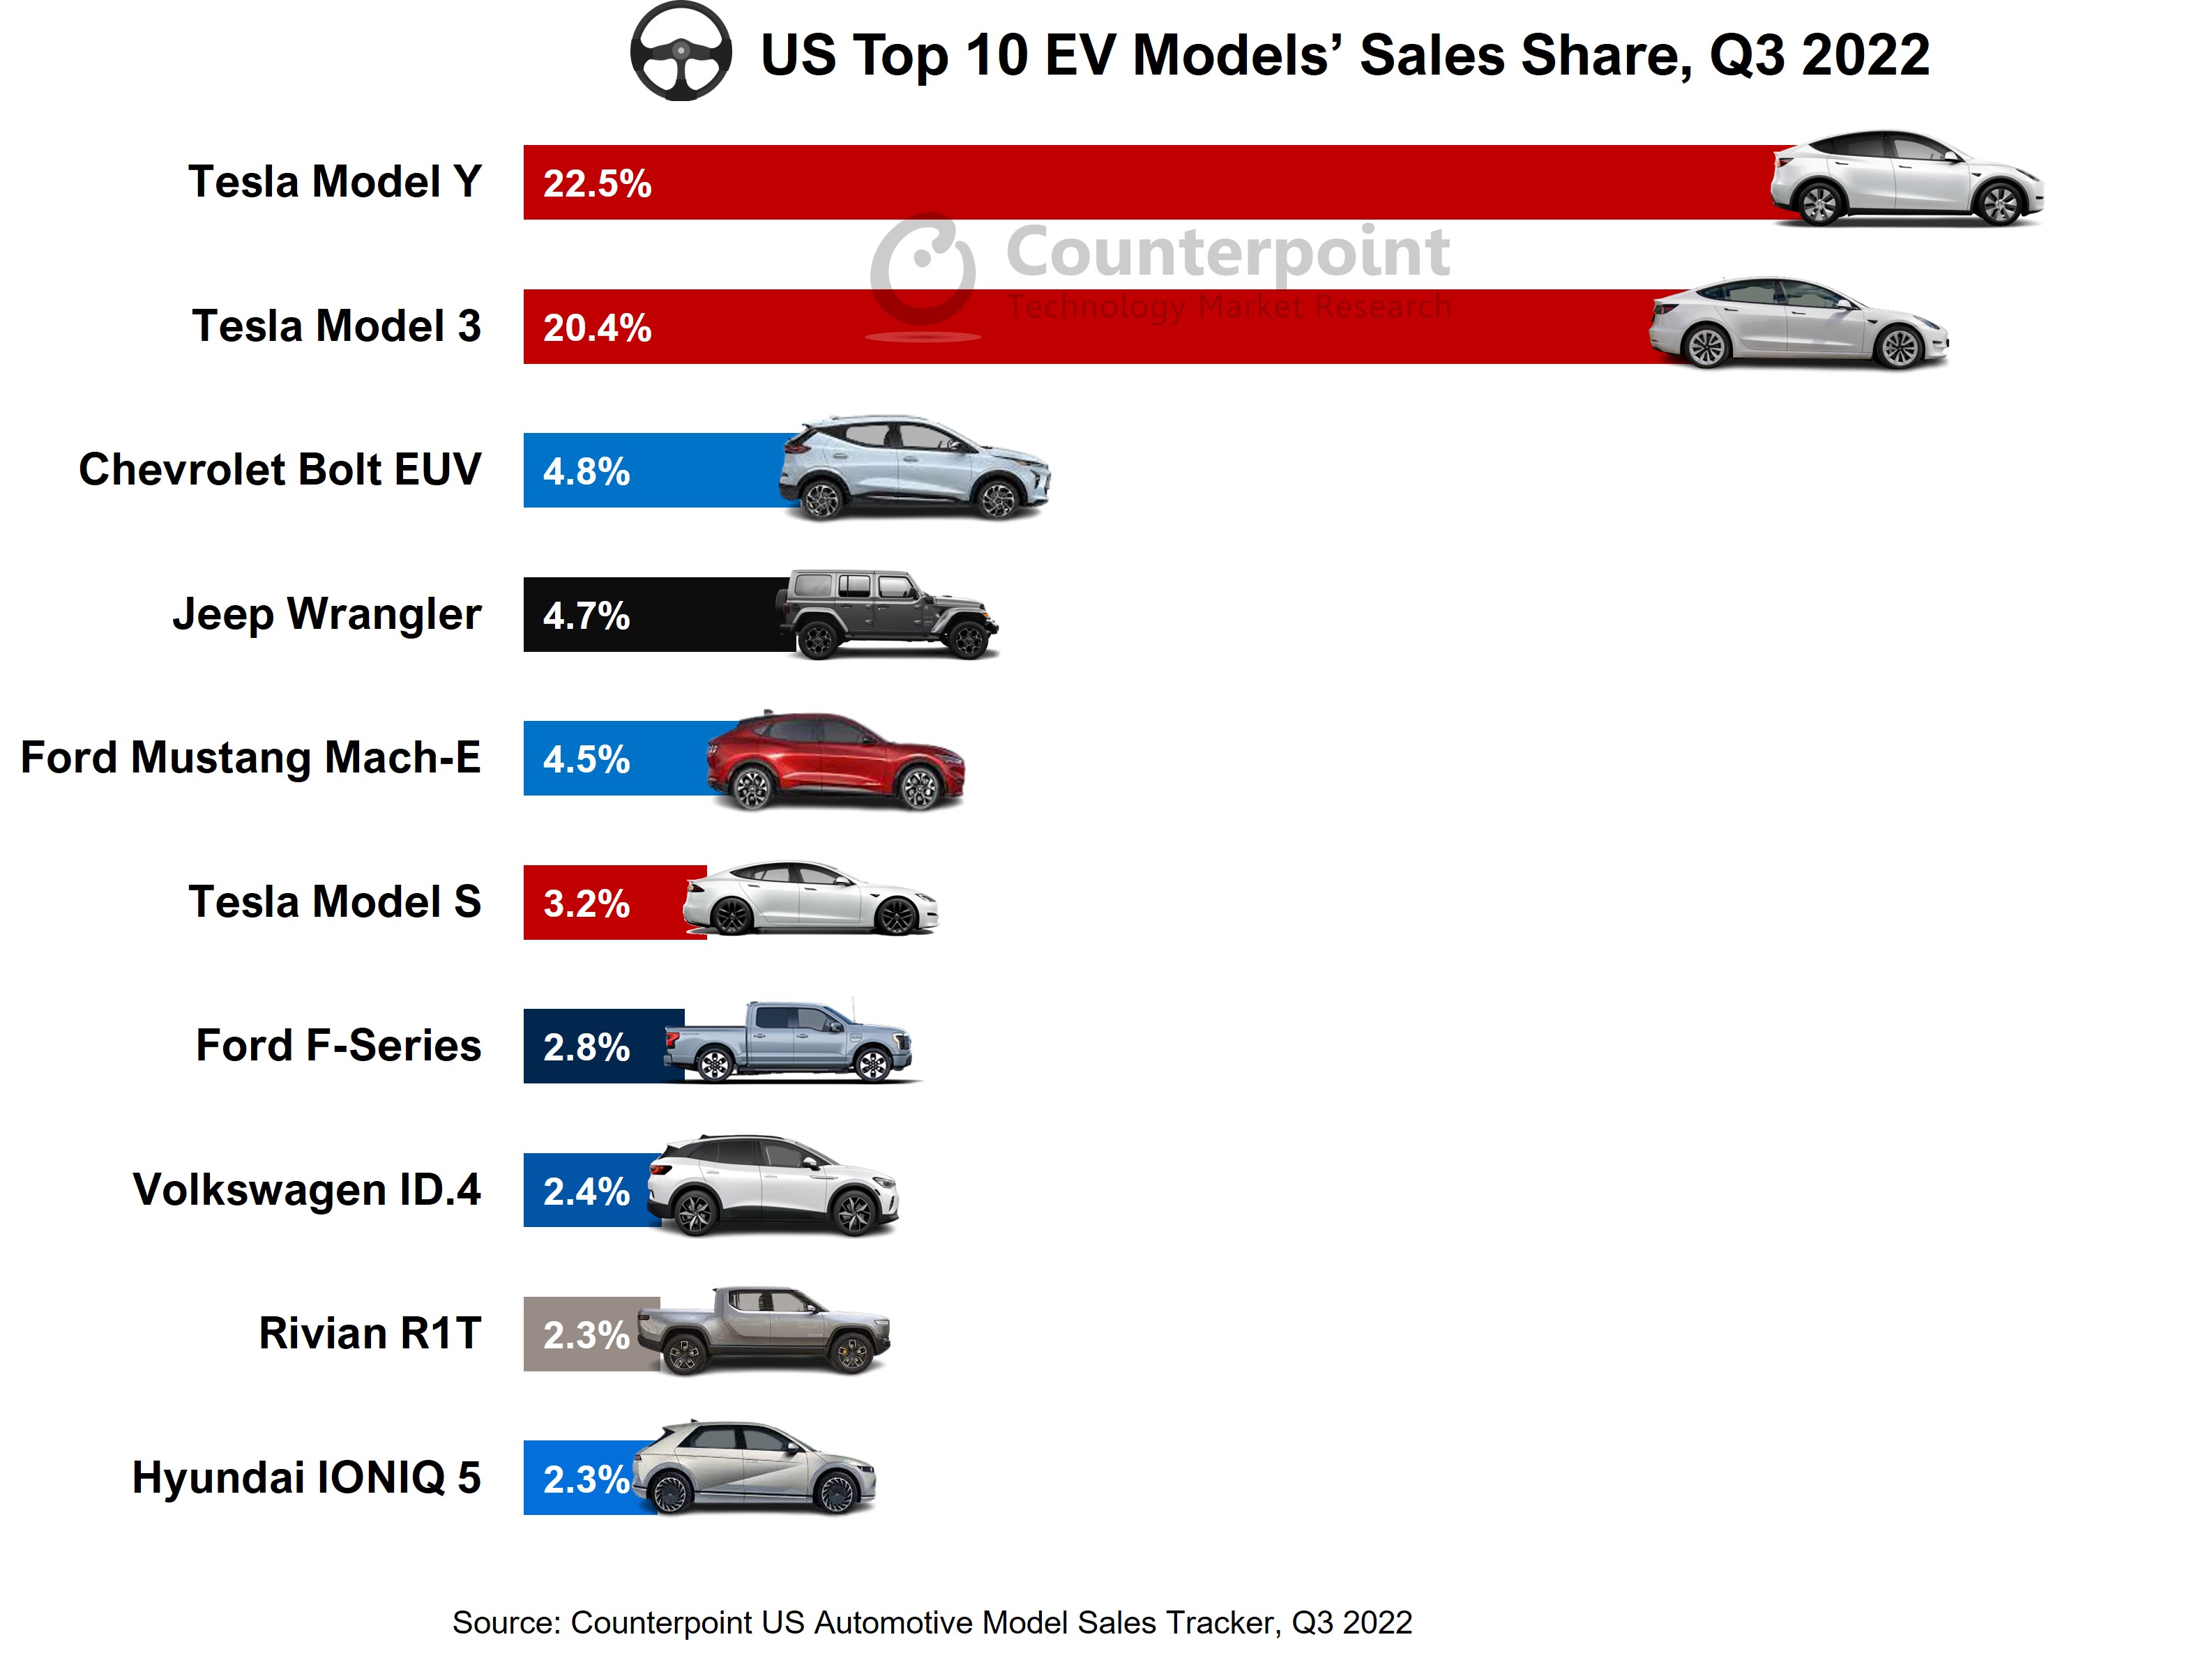 Tesla Leads US EV Market, Eclipsing Next 15 Brands Combined - Counterpoint